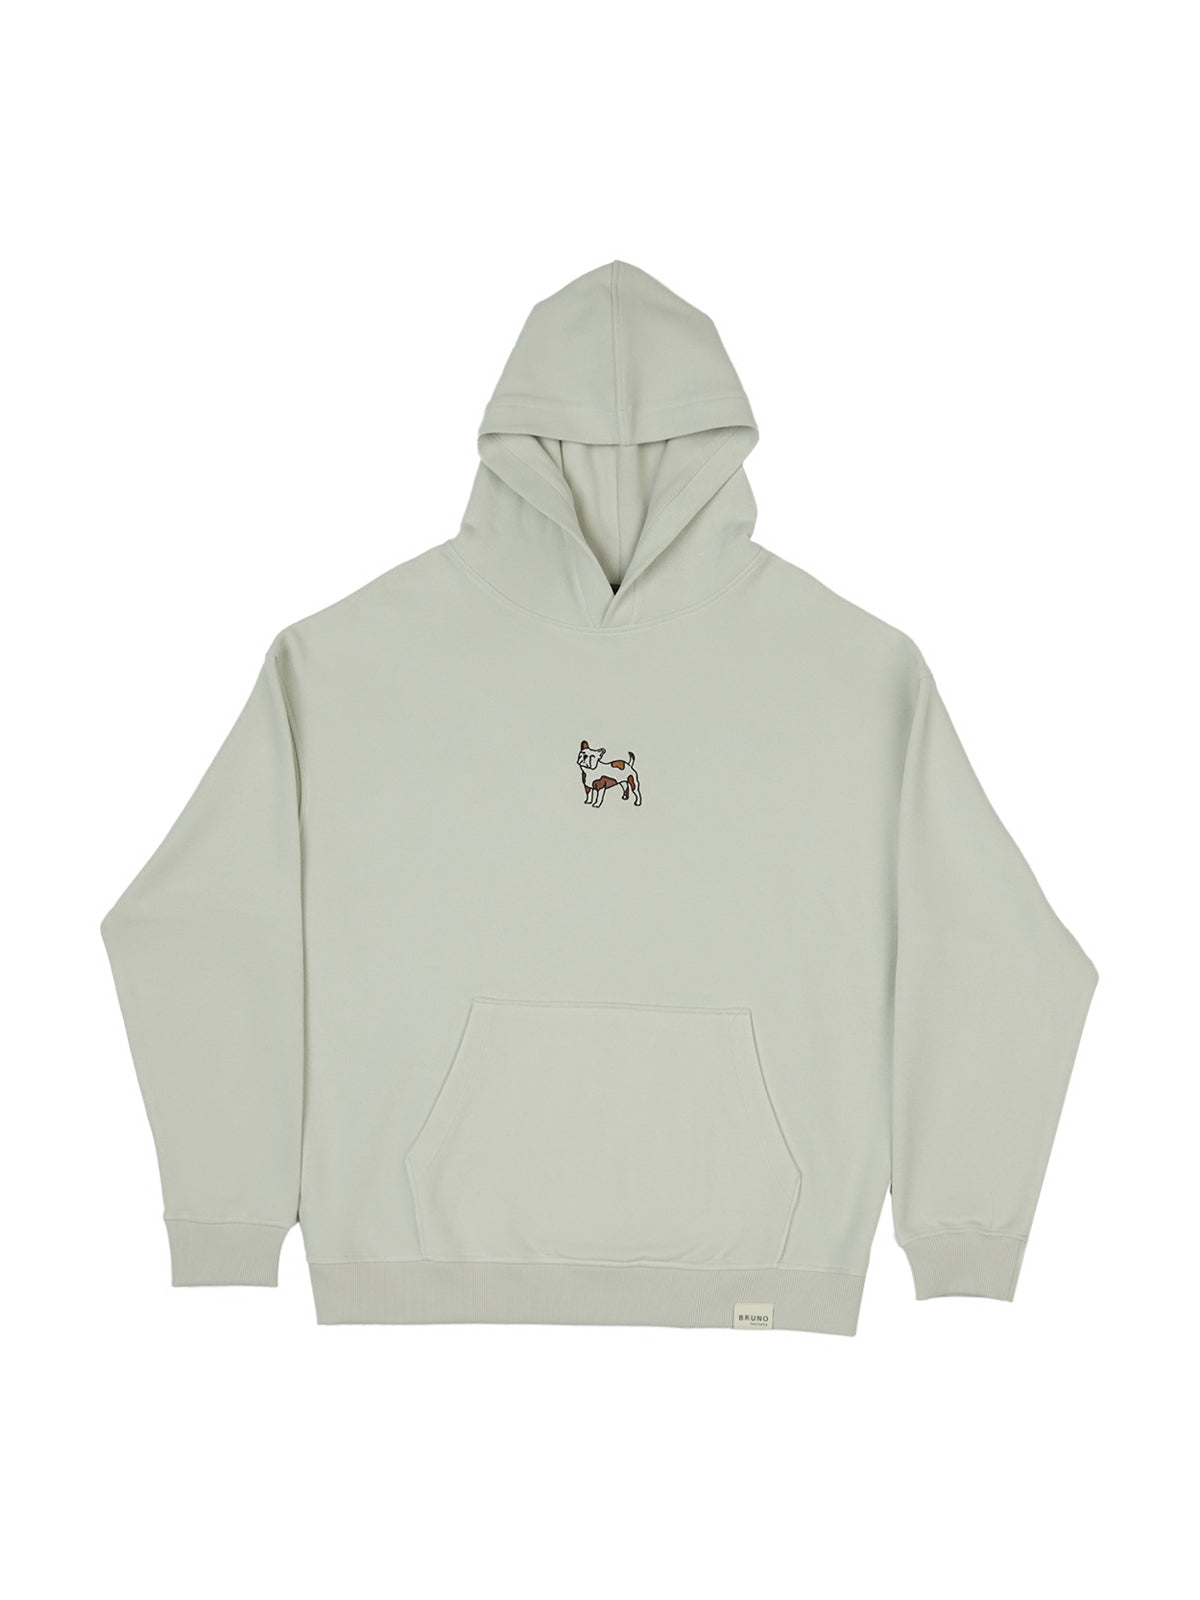 Matchy Hoodie - Gray